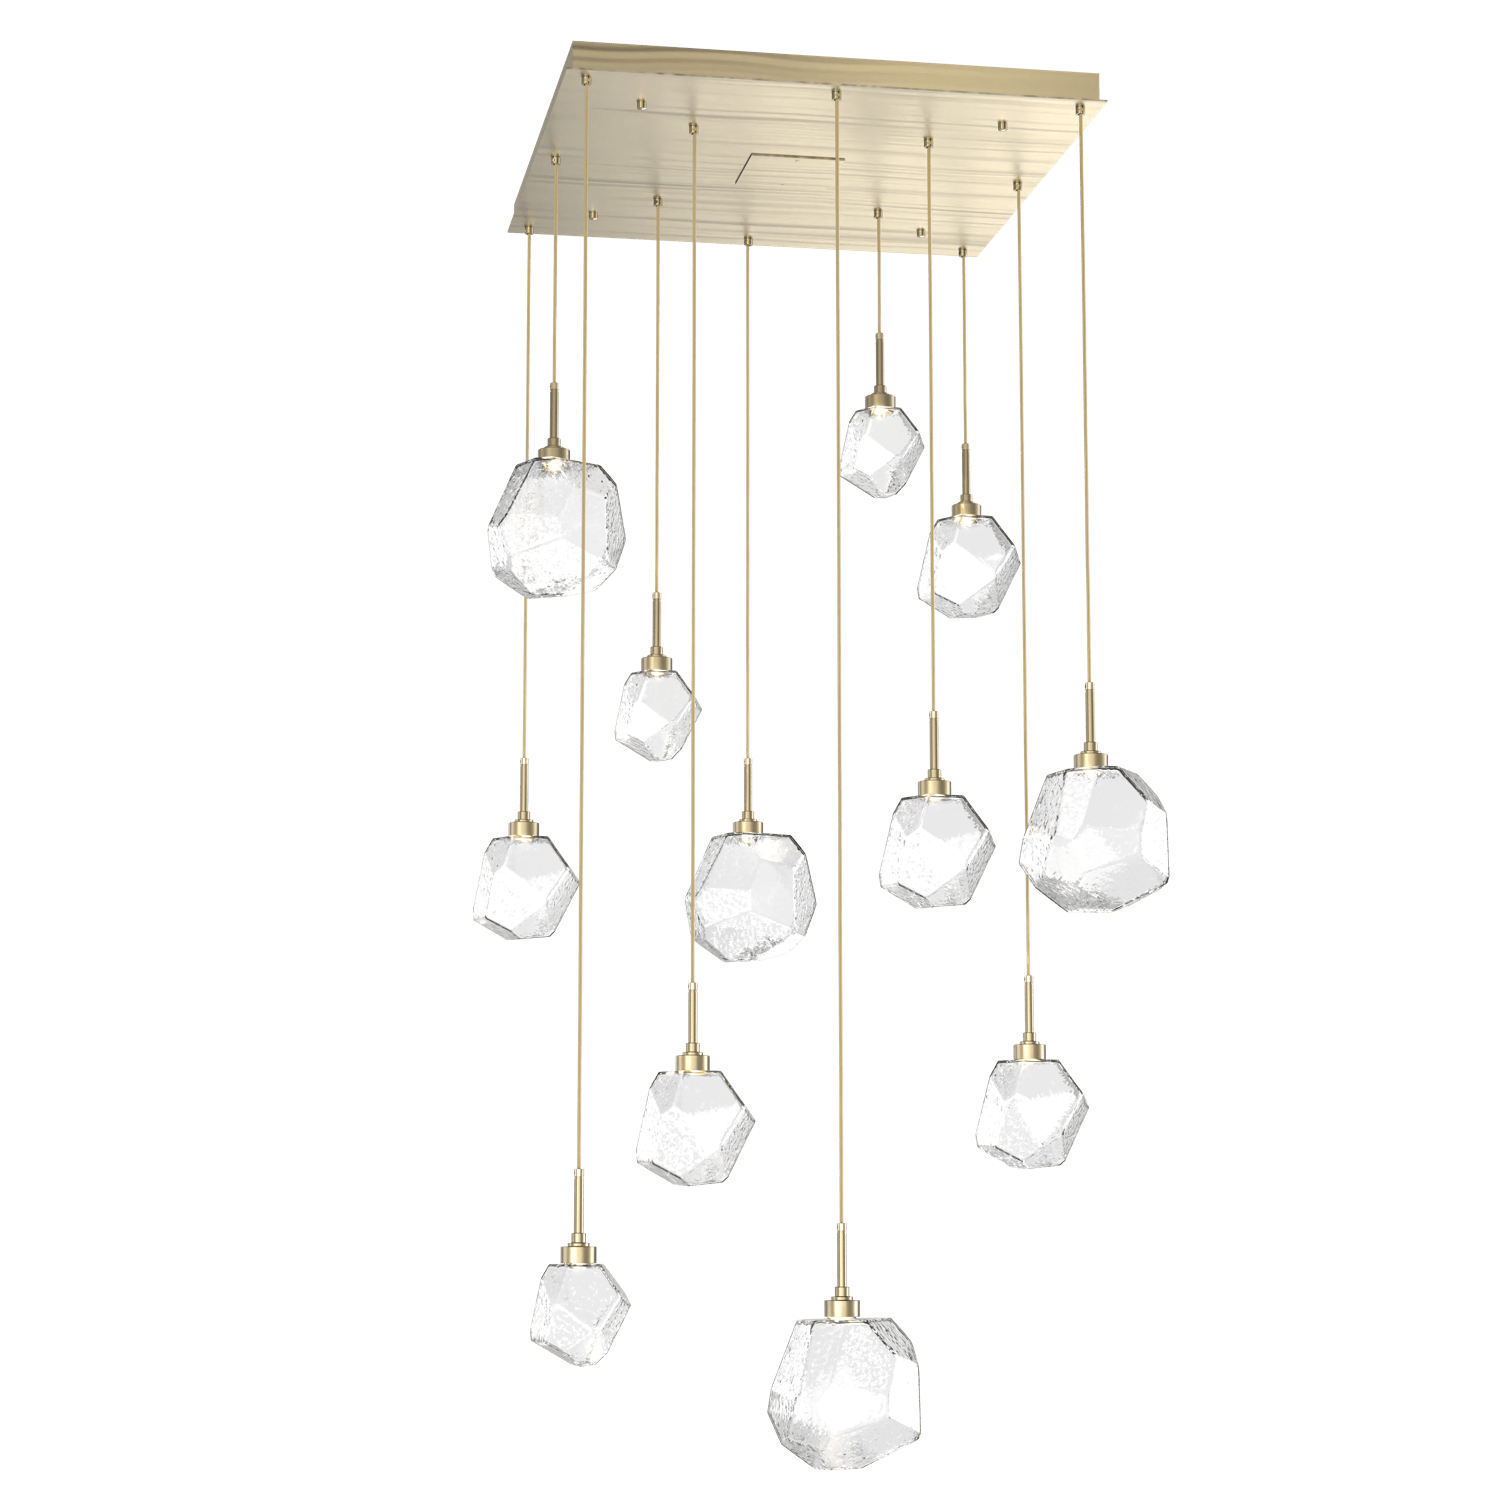 CHB0039-12-HB-C-Hammerton-Studio-Gem-12-light-square-pendant-chandelier-with-heritage-brass-finish-and-clear-blown-glass-shades-and-LED-lamping